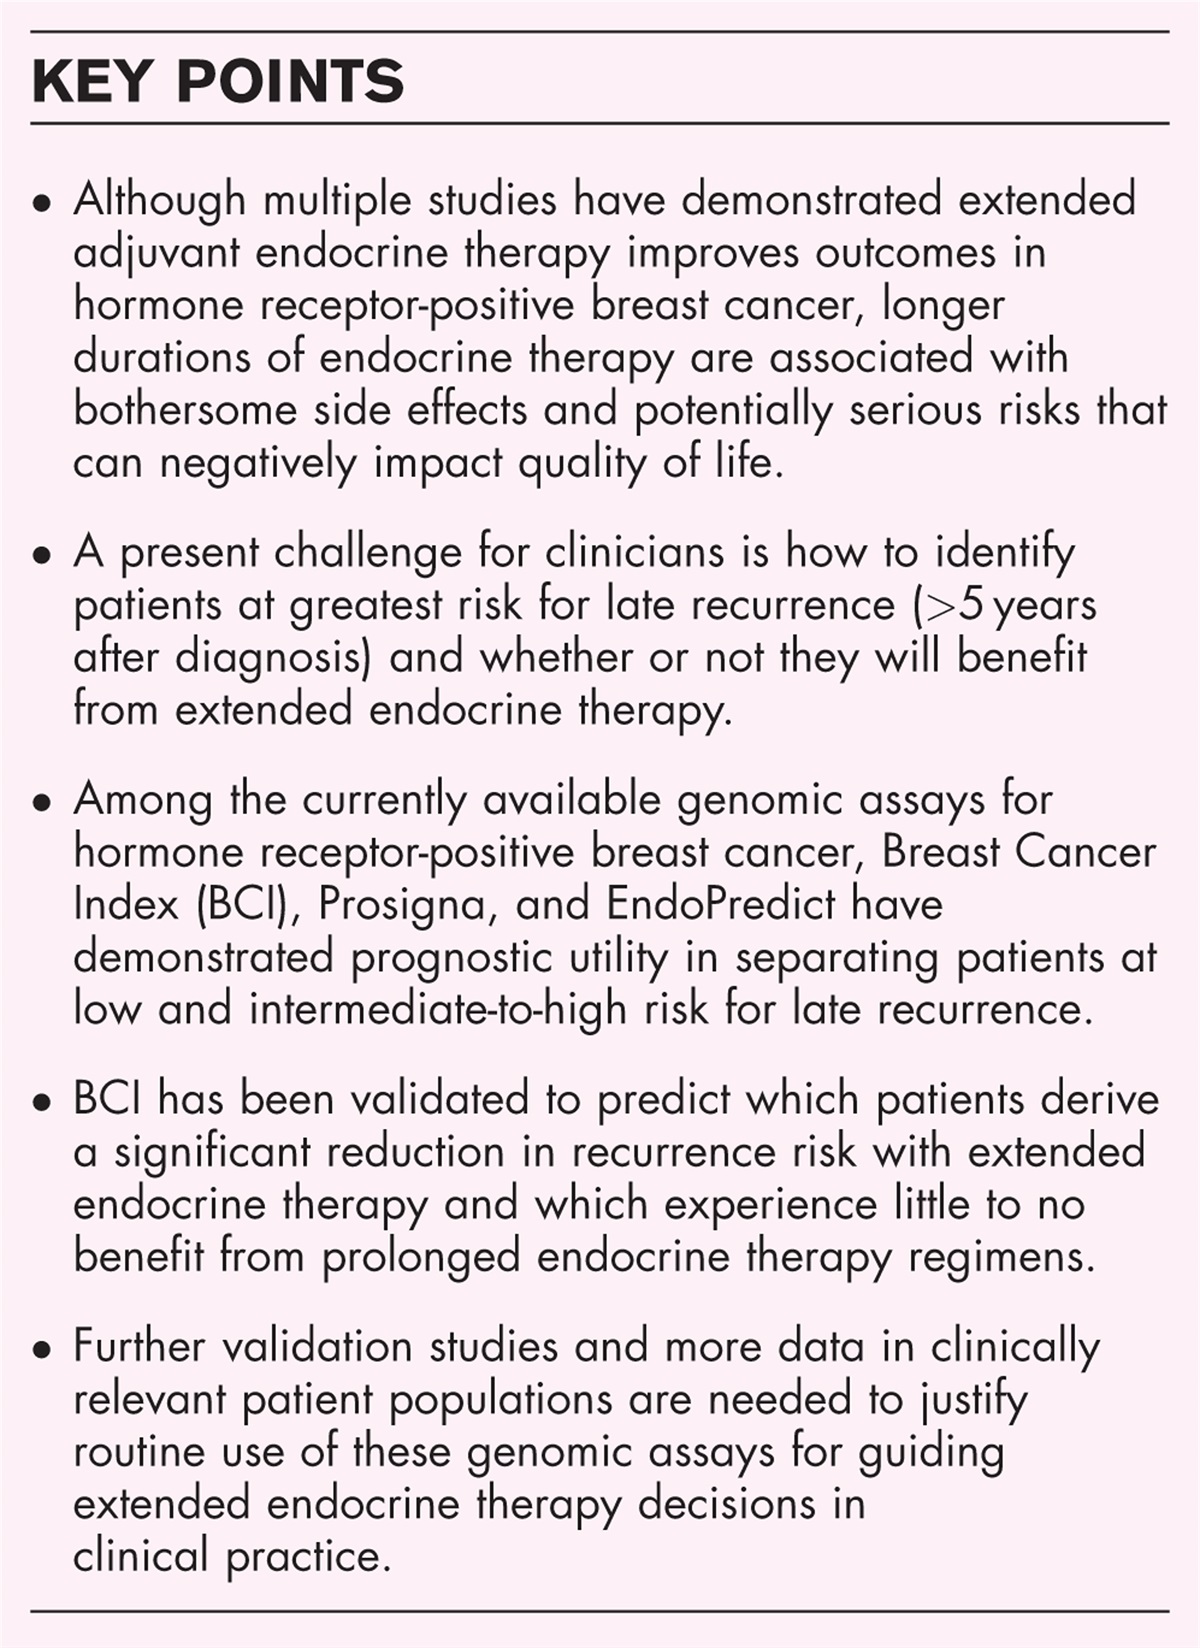 Precision medicine in extended adjuvant endocrine therapy for breast cancer